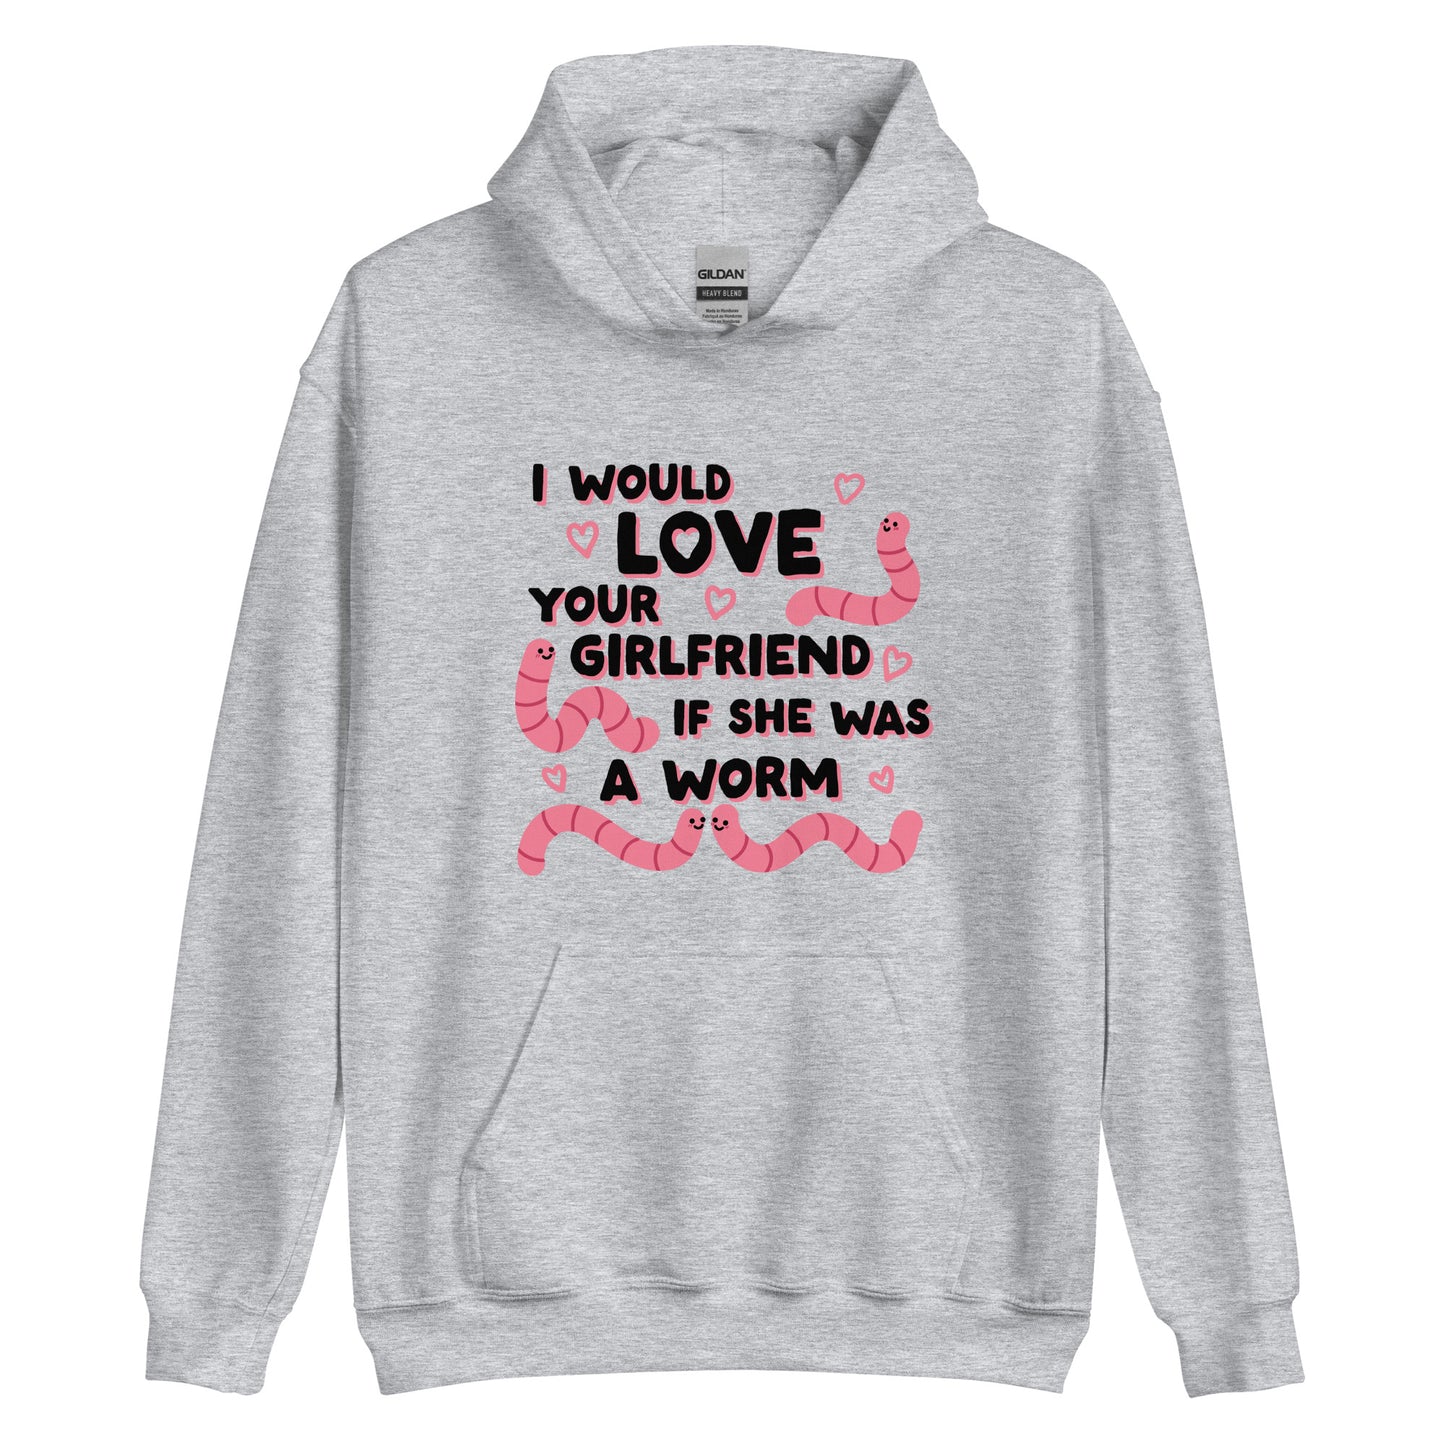 A grey hooded sweatshirt featuring text that reads "I would love your girlfriend if she was a worm". Cute cartoon worms and hearts surround the text.